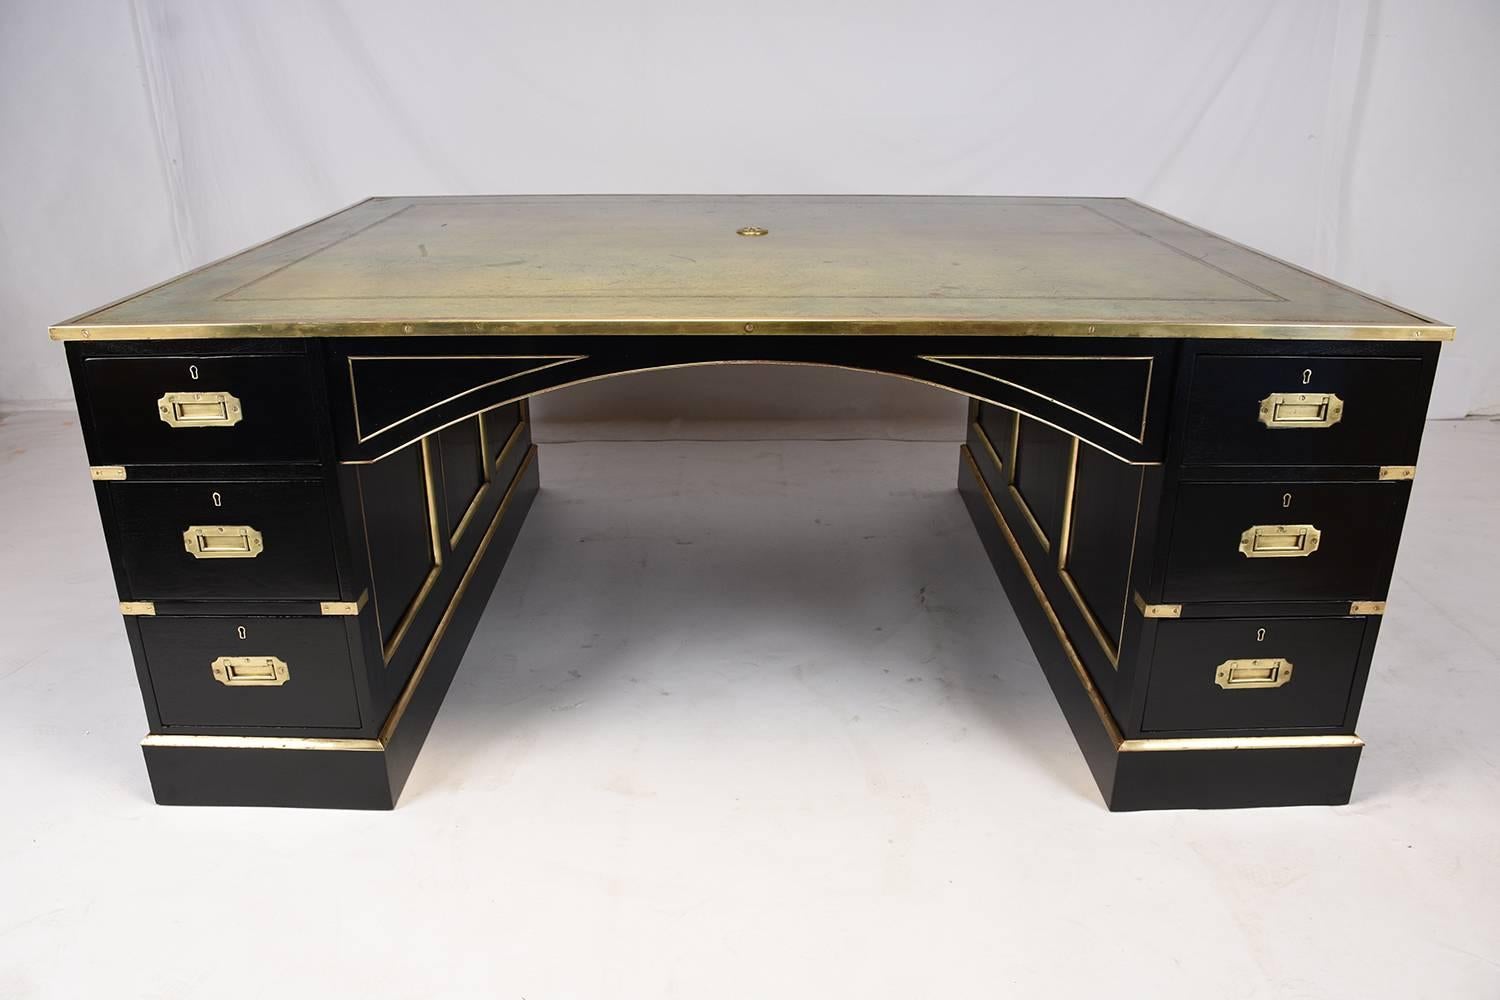 This 1900 Antique English Campaign-style partner desk is made of wood with a beautiful ebonized finish. The top of the desk features the original embossed leather work area with beautiful gilt trim details. There are twelve drawers throughout the